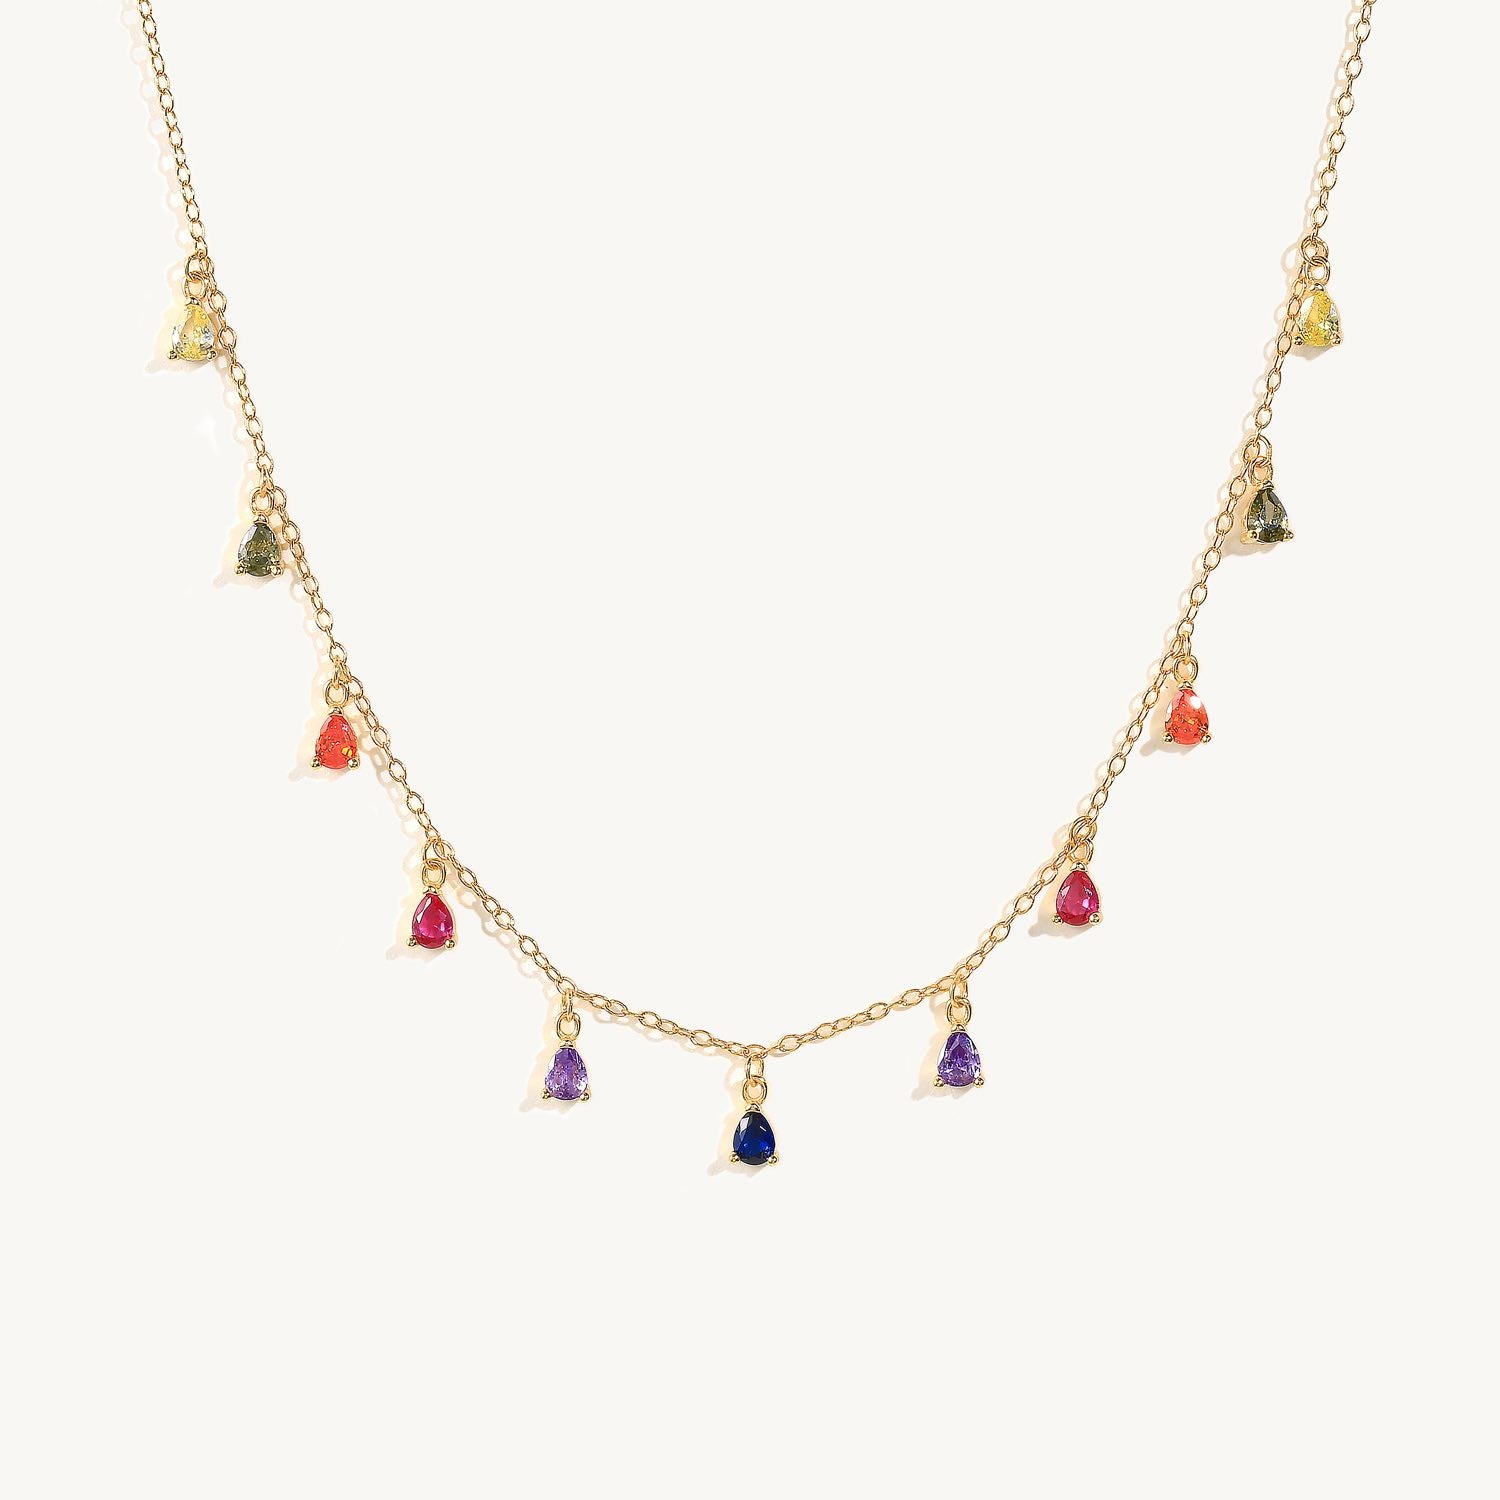 A gold-plated sterling silver zirconia stone chain necklace.